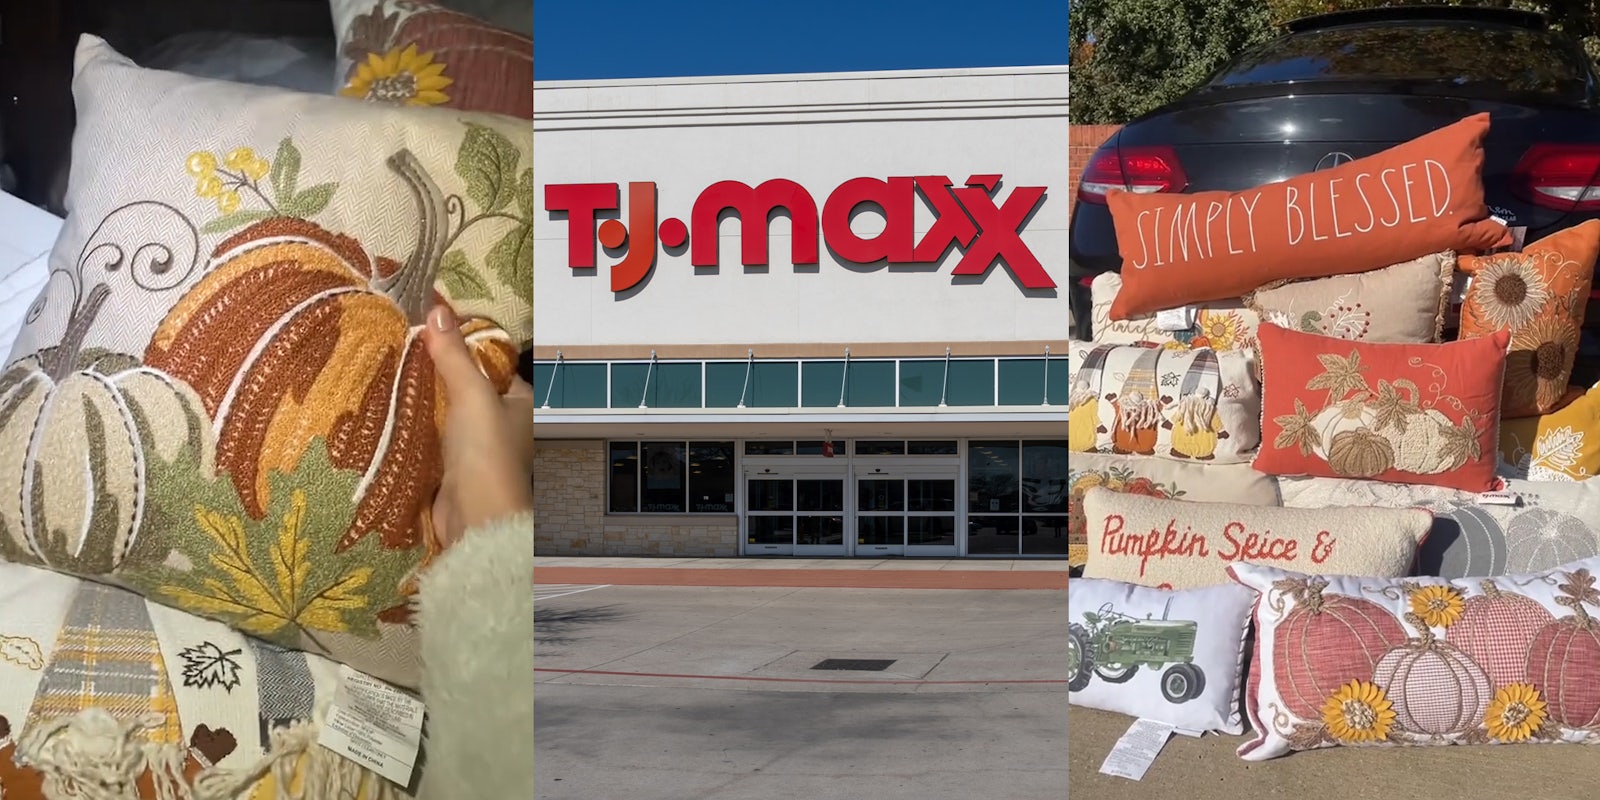 TJ MAXX customer holding fall pillow in dumpster (l) TX MAXX building with sign (c) fall decor pillows stacked outside (r)